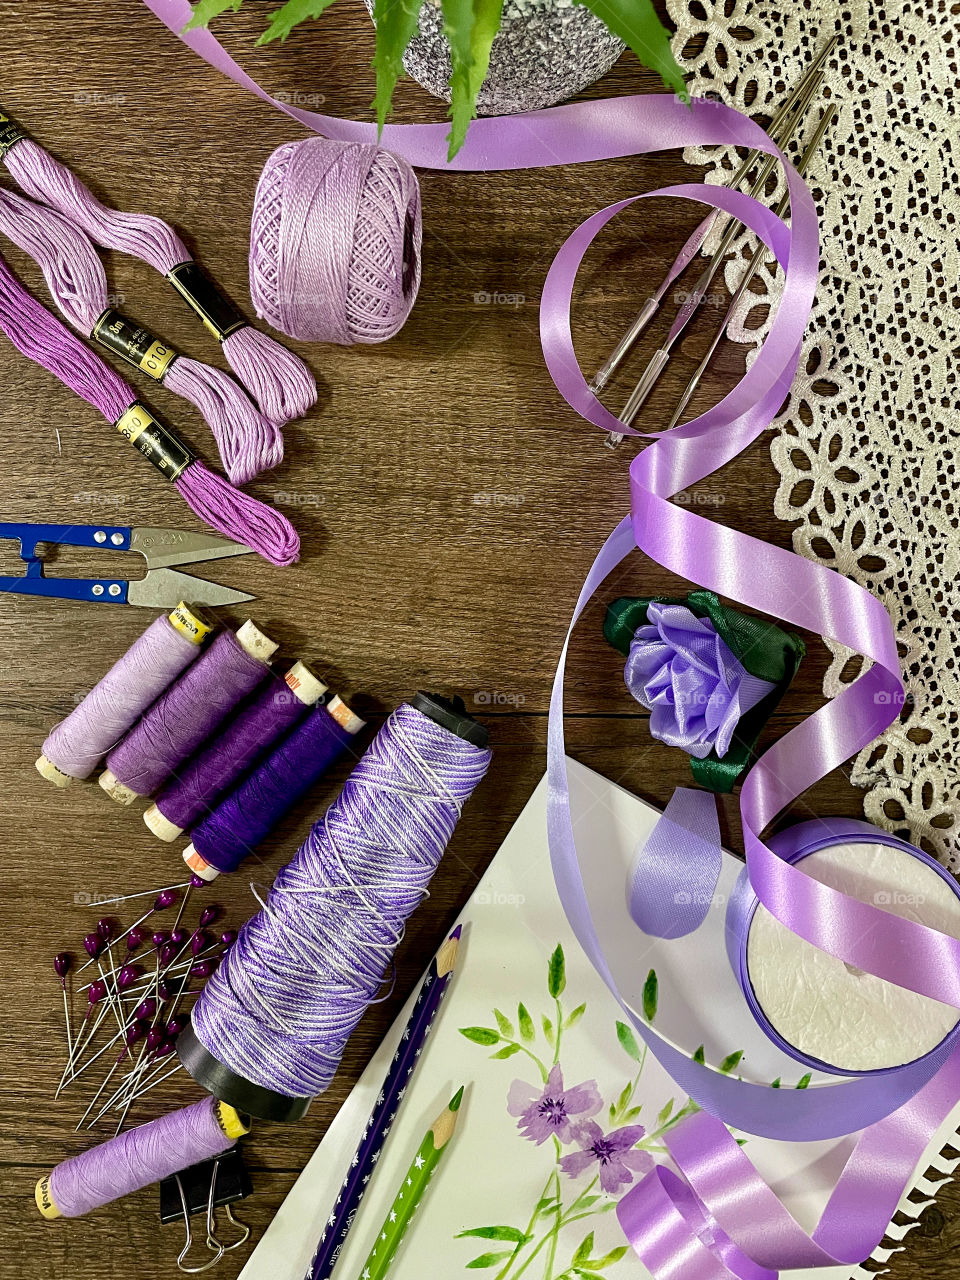 Your best flat lays. Embroidery threads ,satin ribbons, drawing pencils , lace satin ribbons are on a wooden table . Craft and art based theme concept 